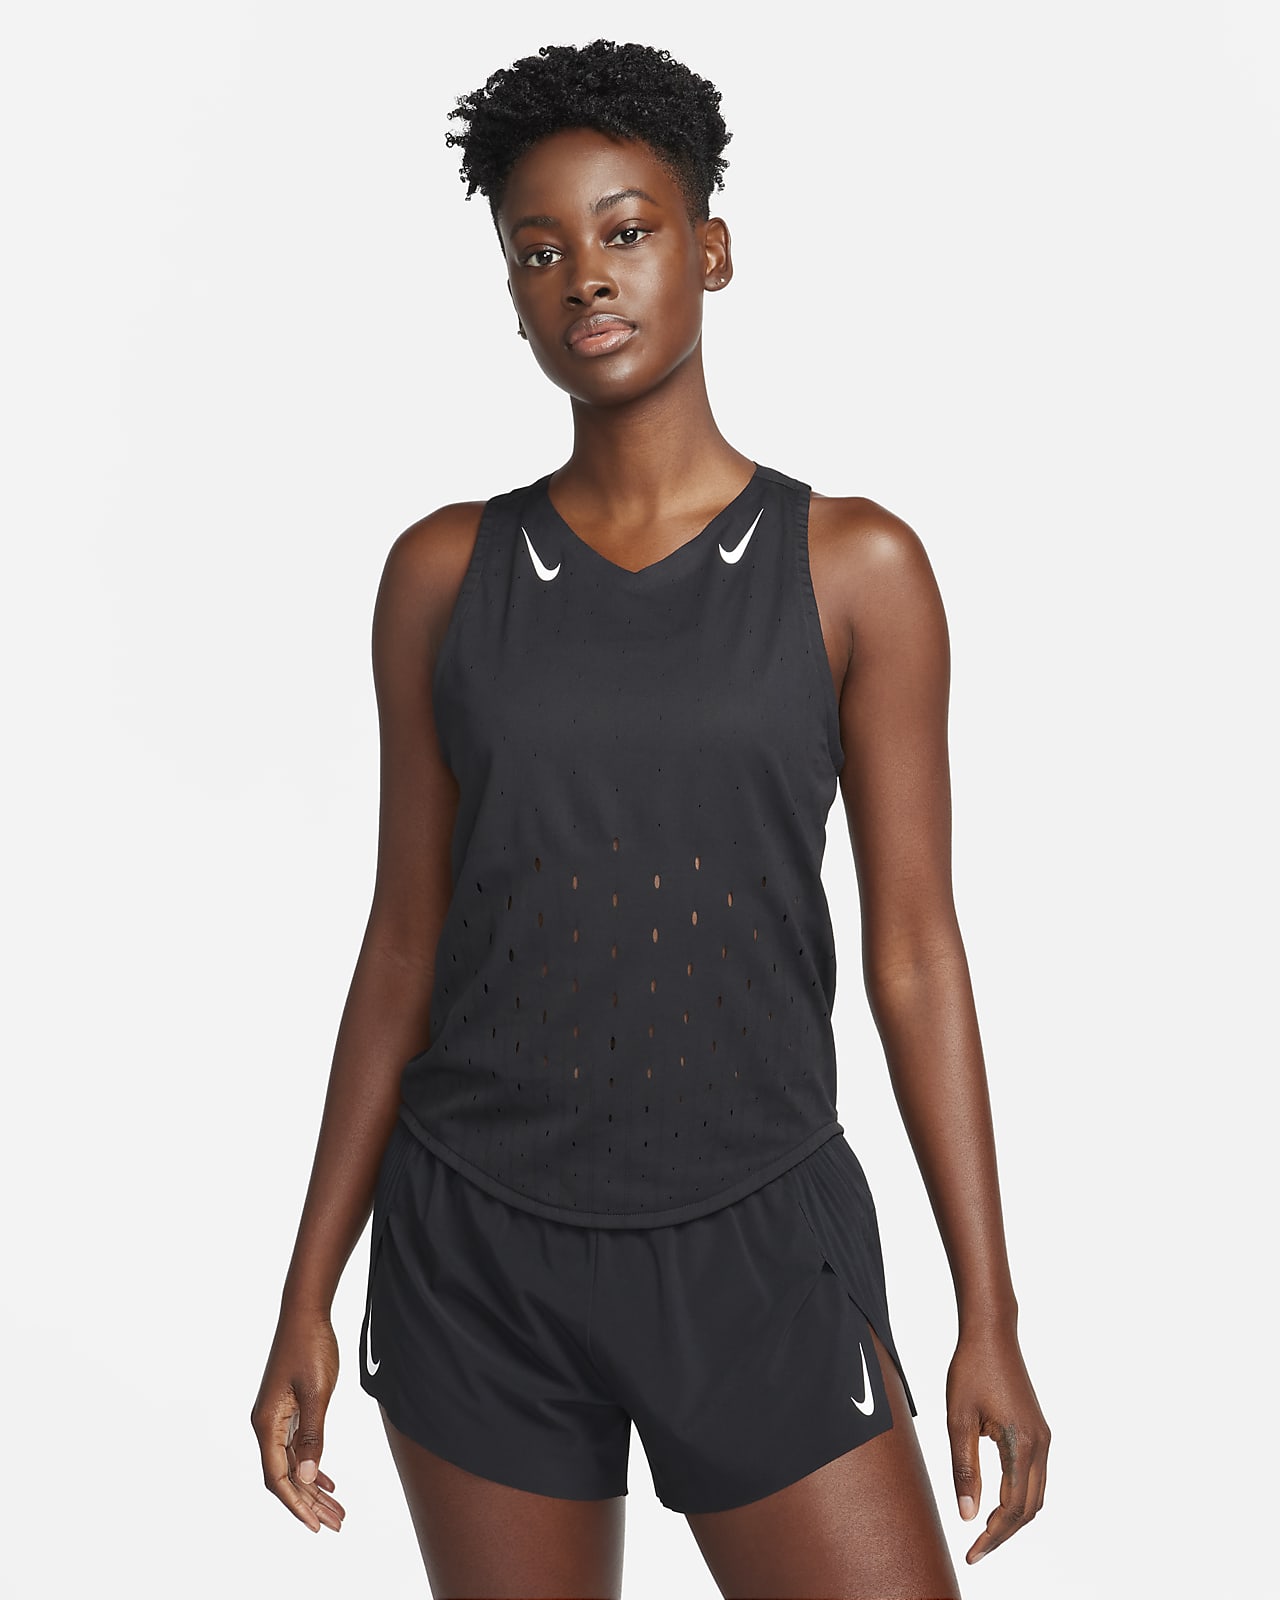 Women's Running Clothes. Nike CA